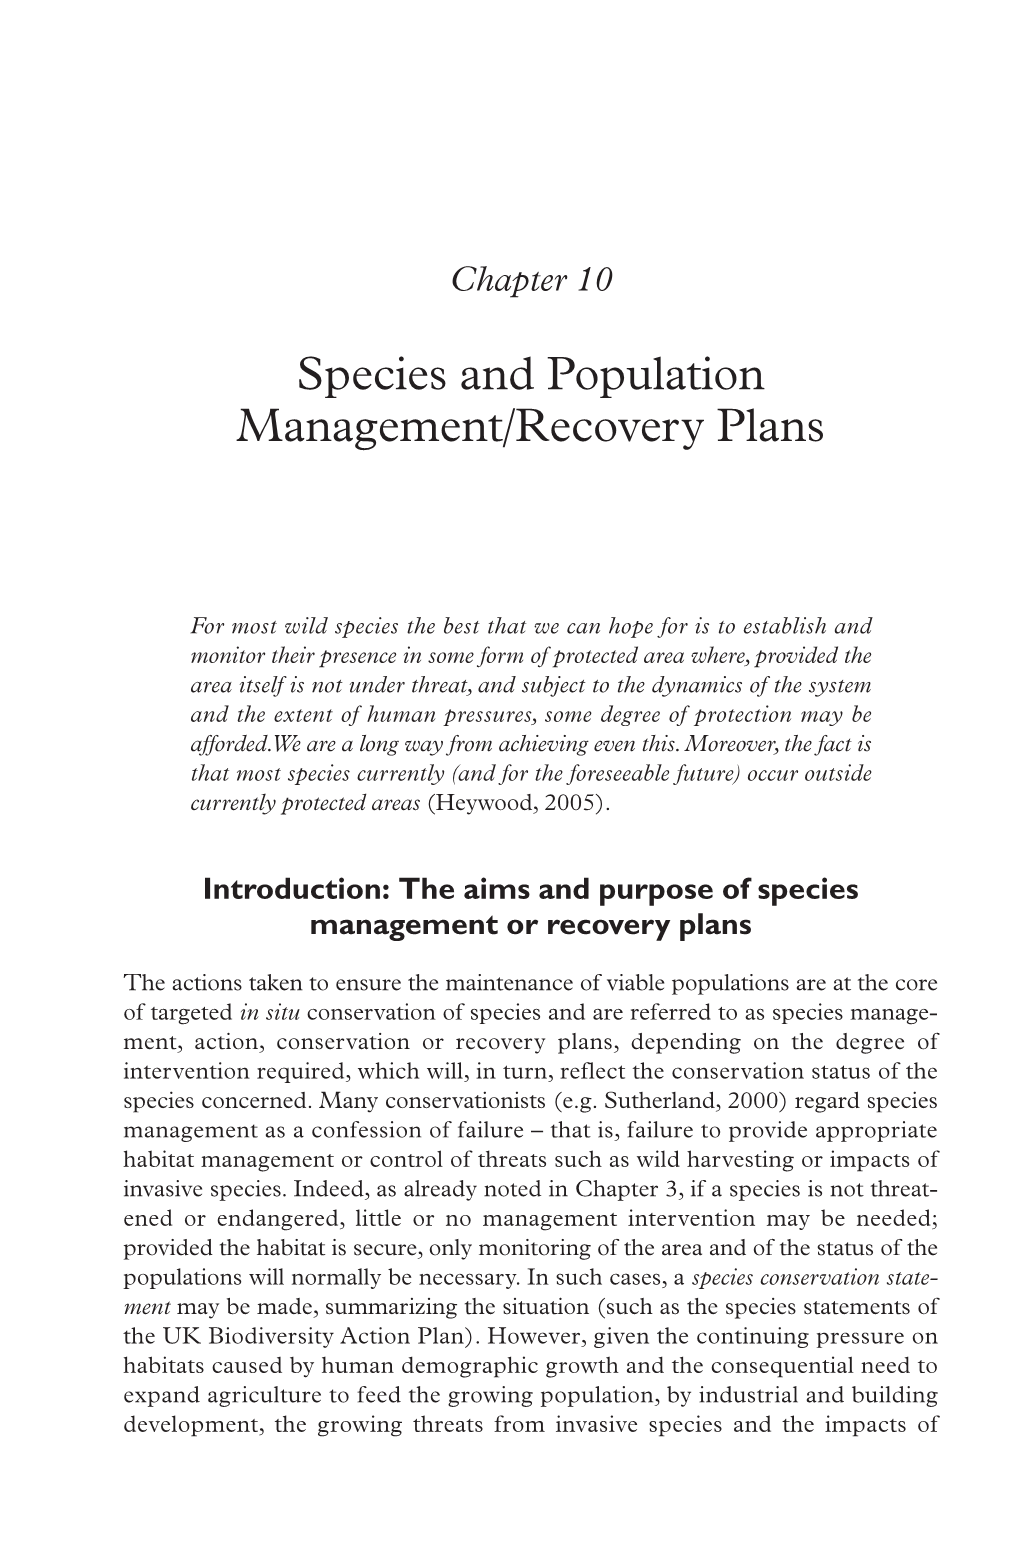 Species and Population Management/Recovery Plans